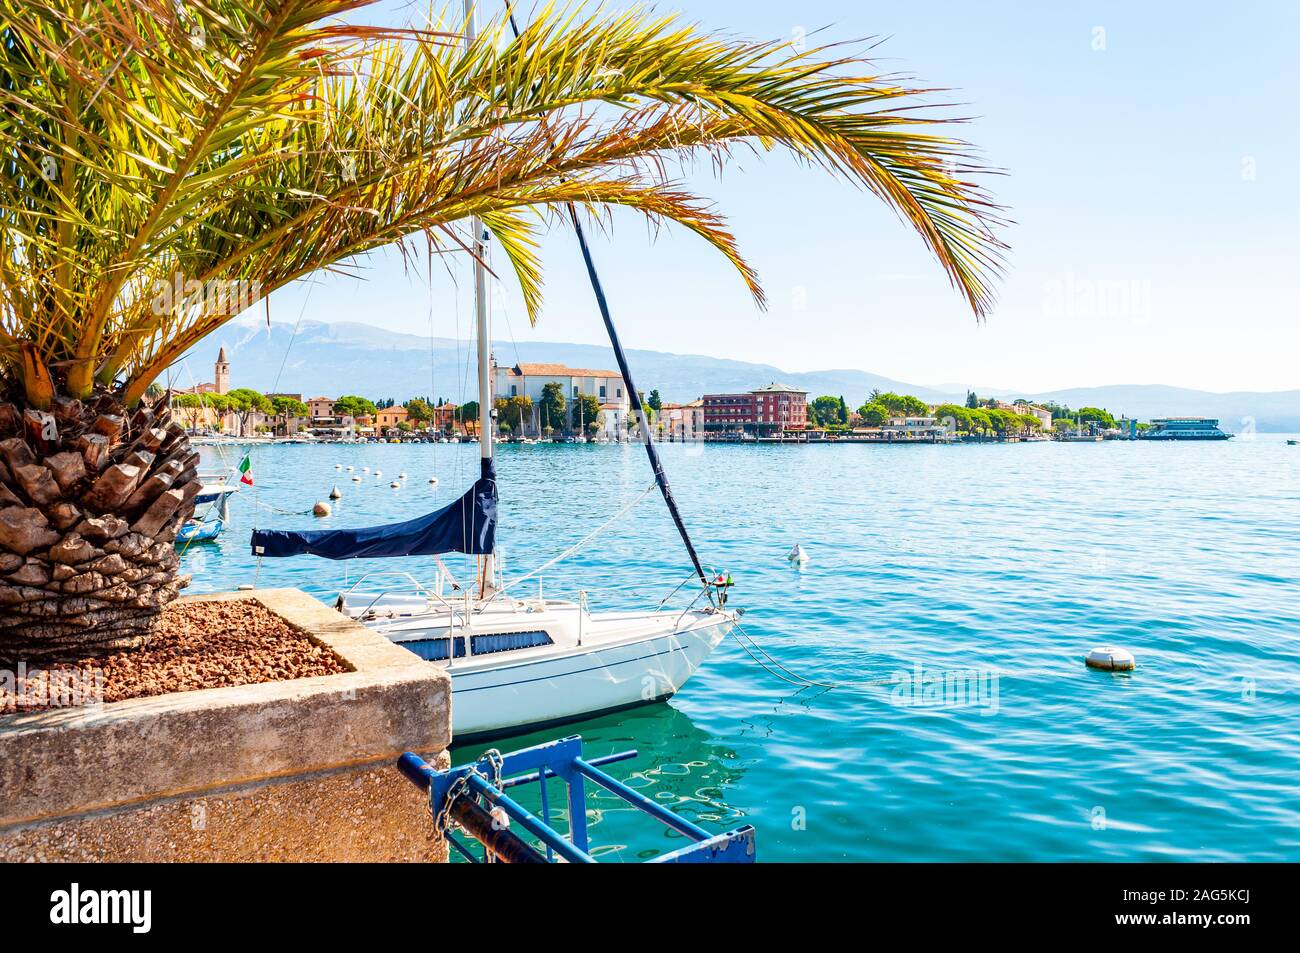 Garda lake western shore, Lombardy Italy. View on Toscolano Maderno cityscape through palm leaves growing on the beach with parked white sailing yacht Stock Photo